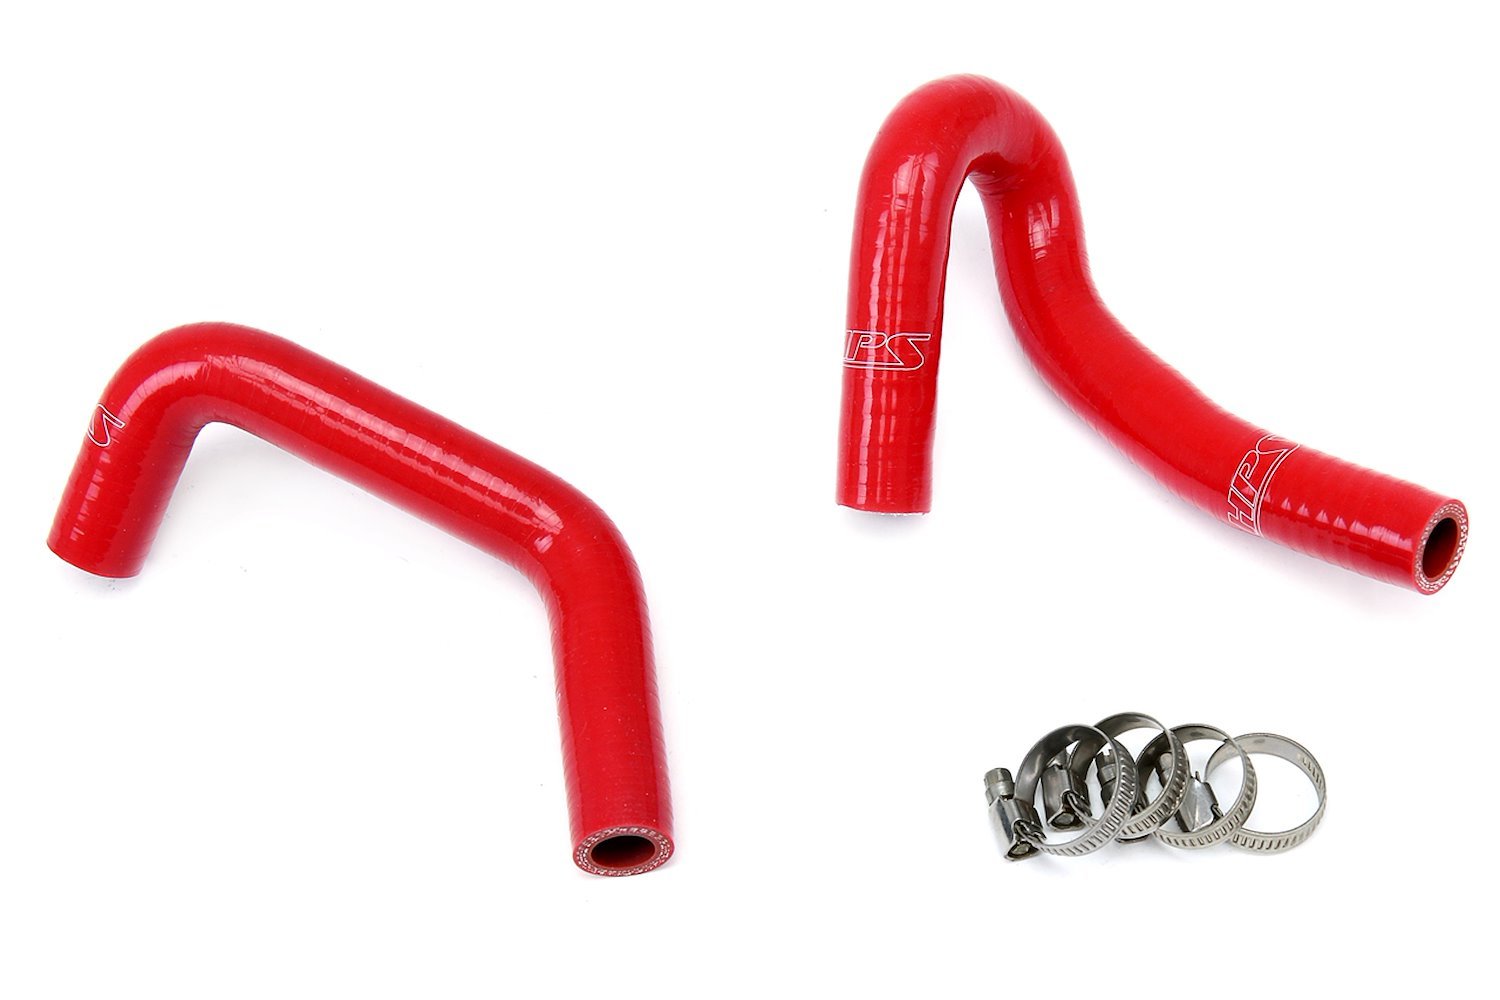 57-1311-RED Heater Hose Kit, High-Temp 3-Ply Reinforced Silicone, Replace OEM Rubber Heater Coolant Hoses